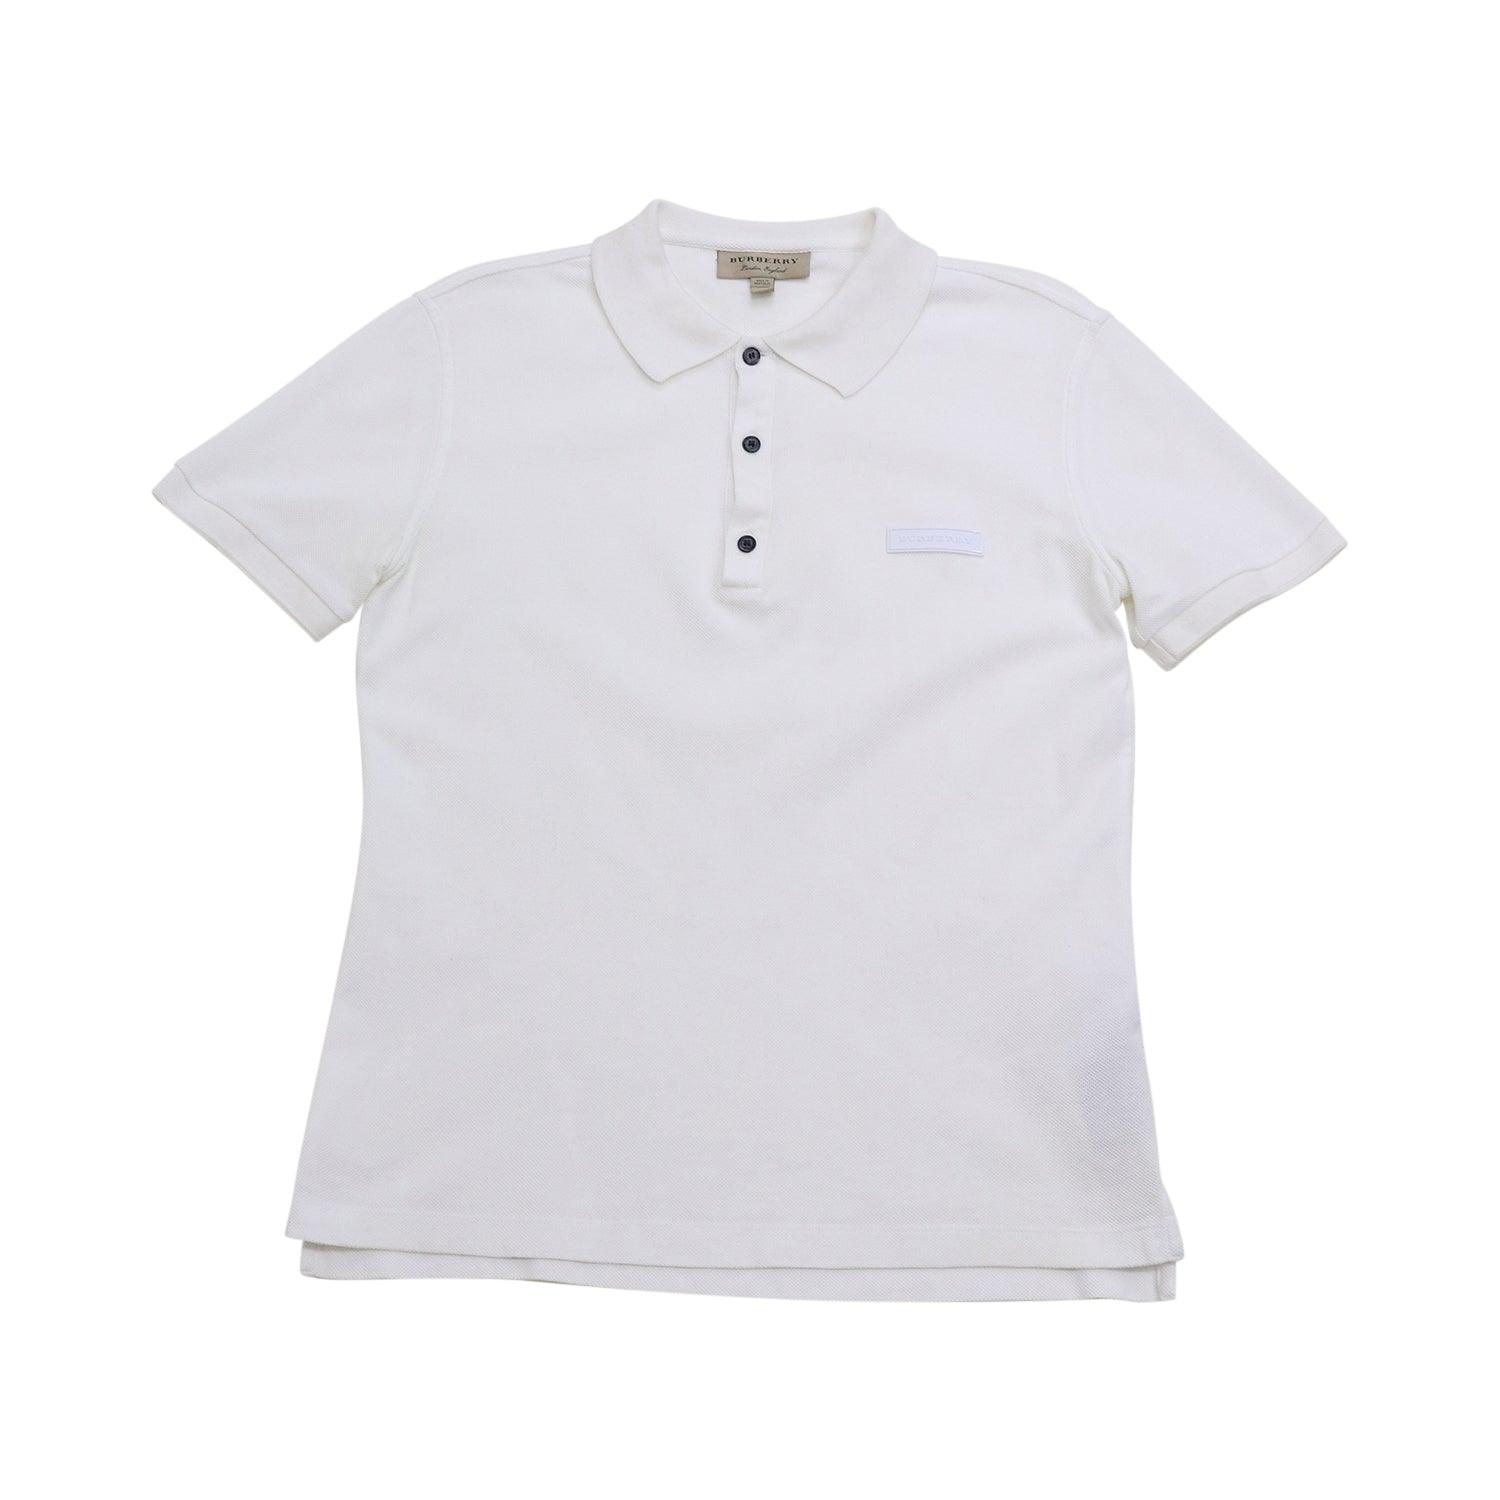 Burberry Polo Top - Men's S - Fashionably Yours